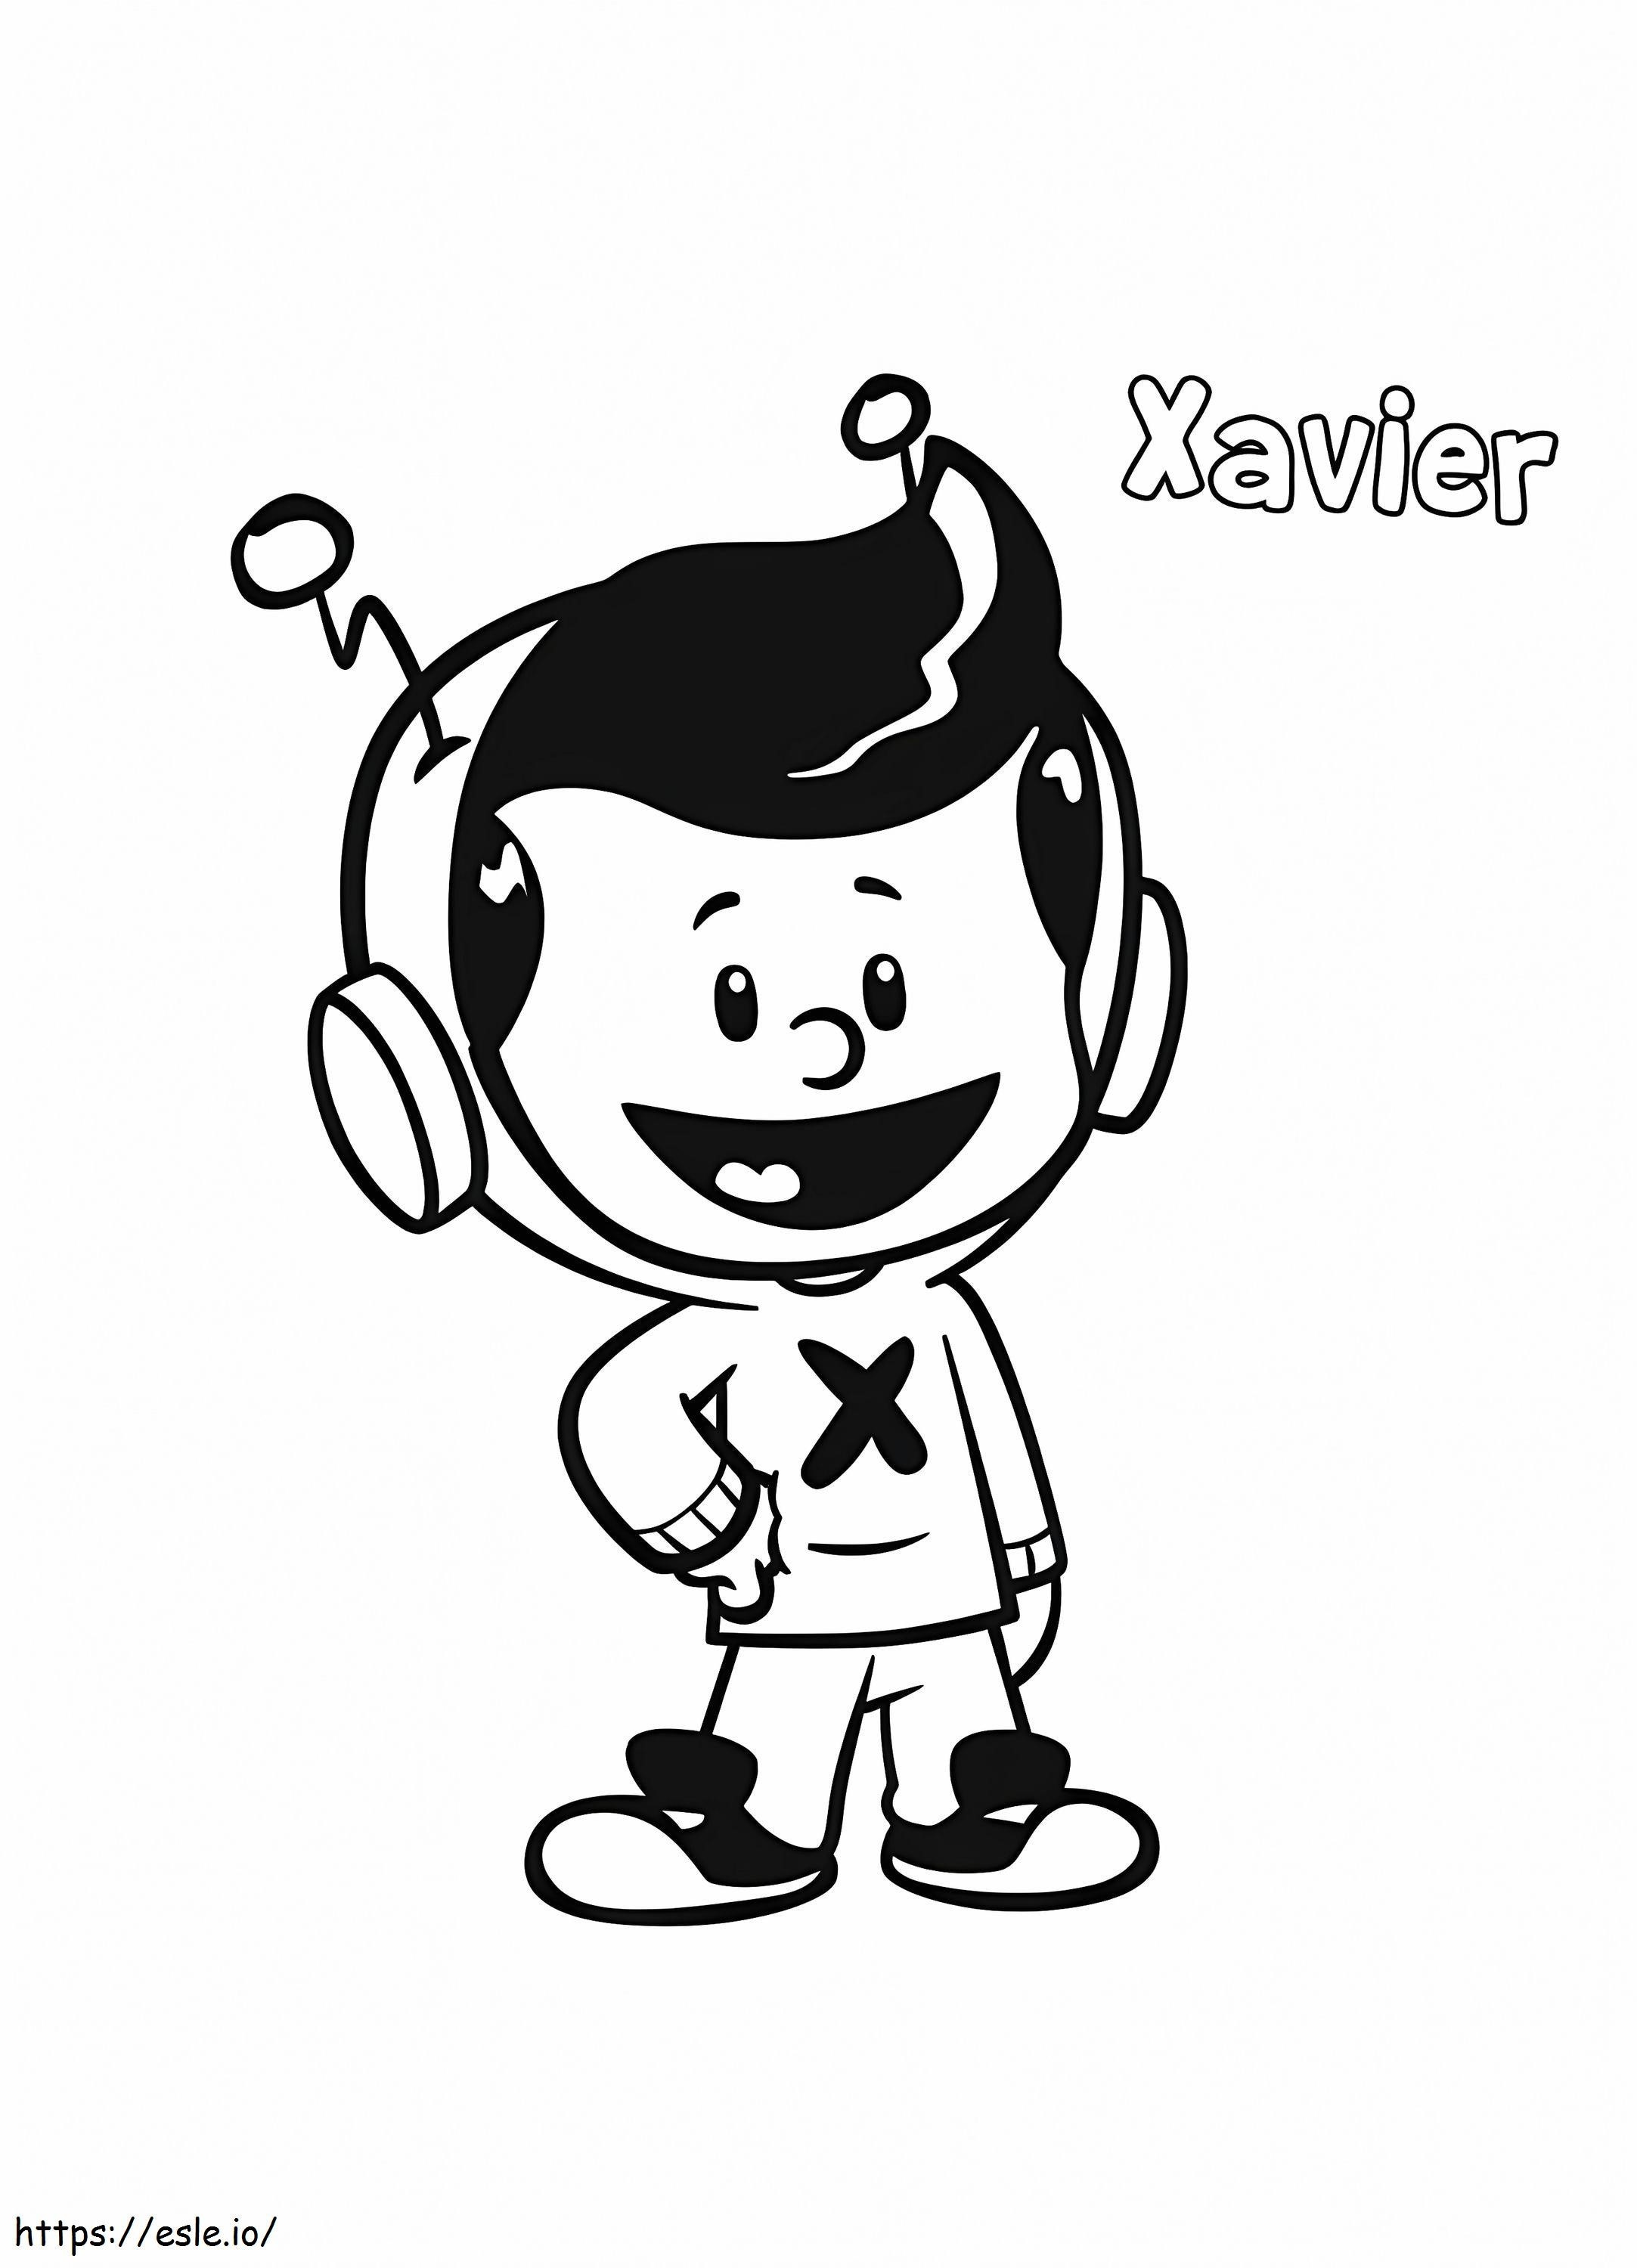 Xavier Riddle coloring page